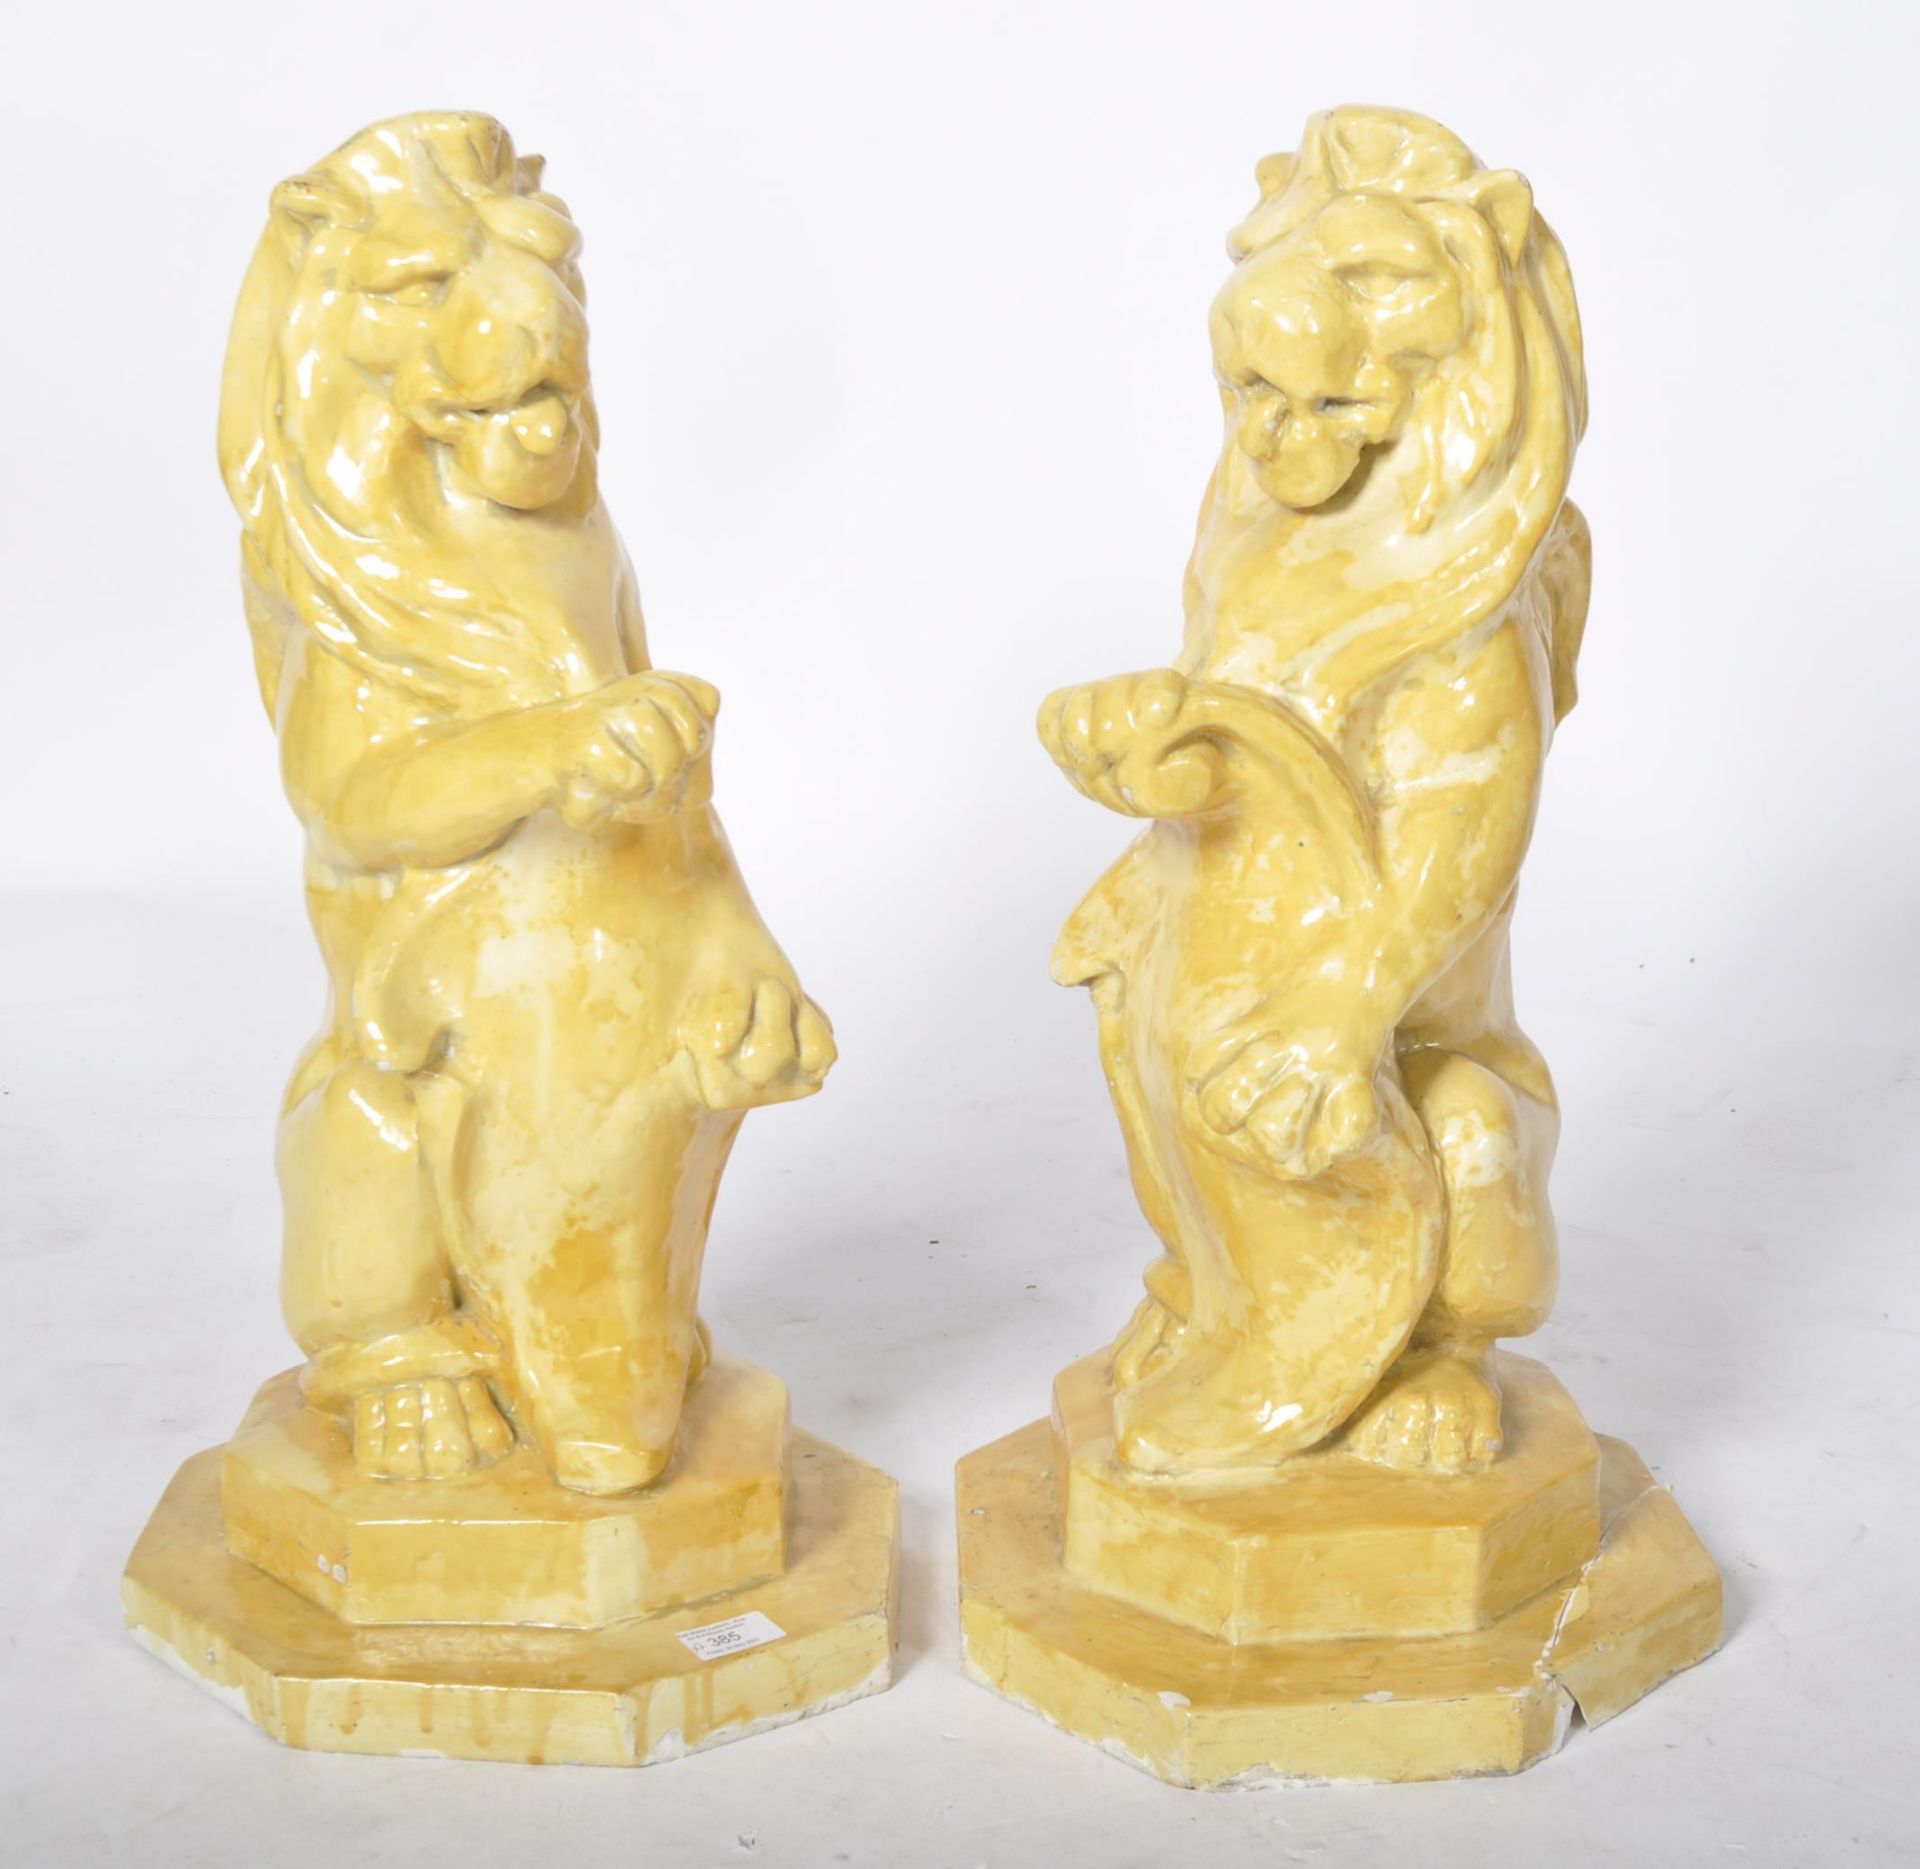 20TH CENTURY MATCHING PAIR OF POTTERY GARDEN LION FIGURES